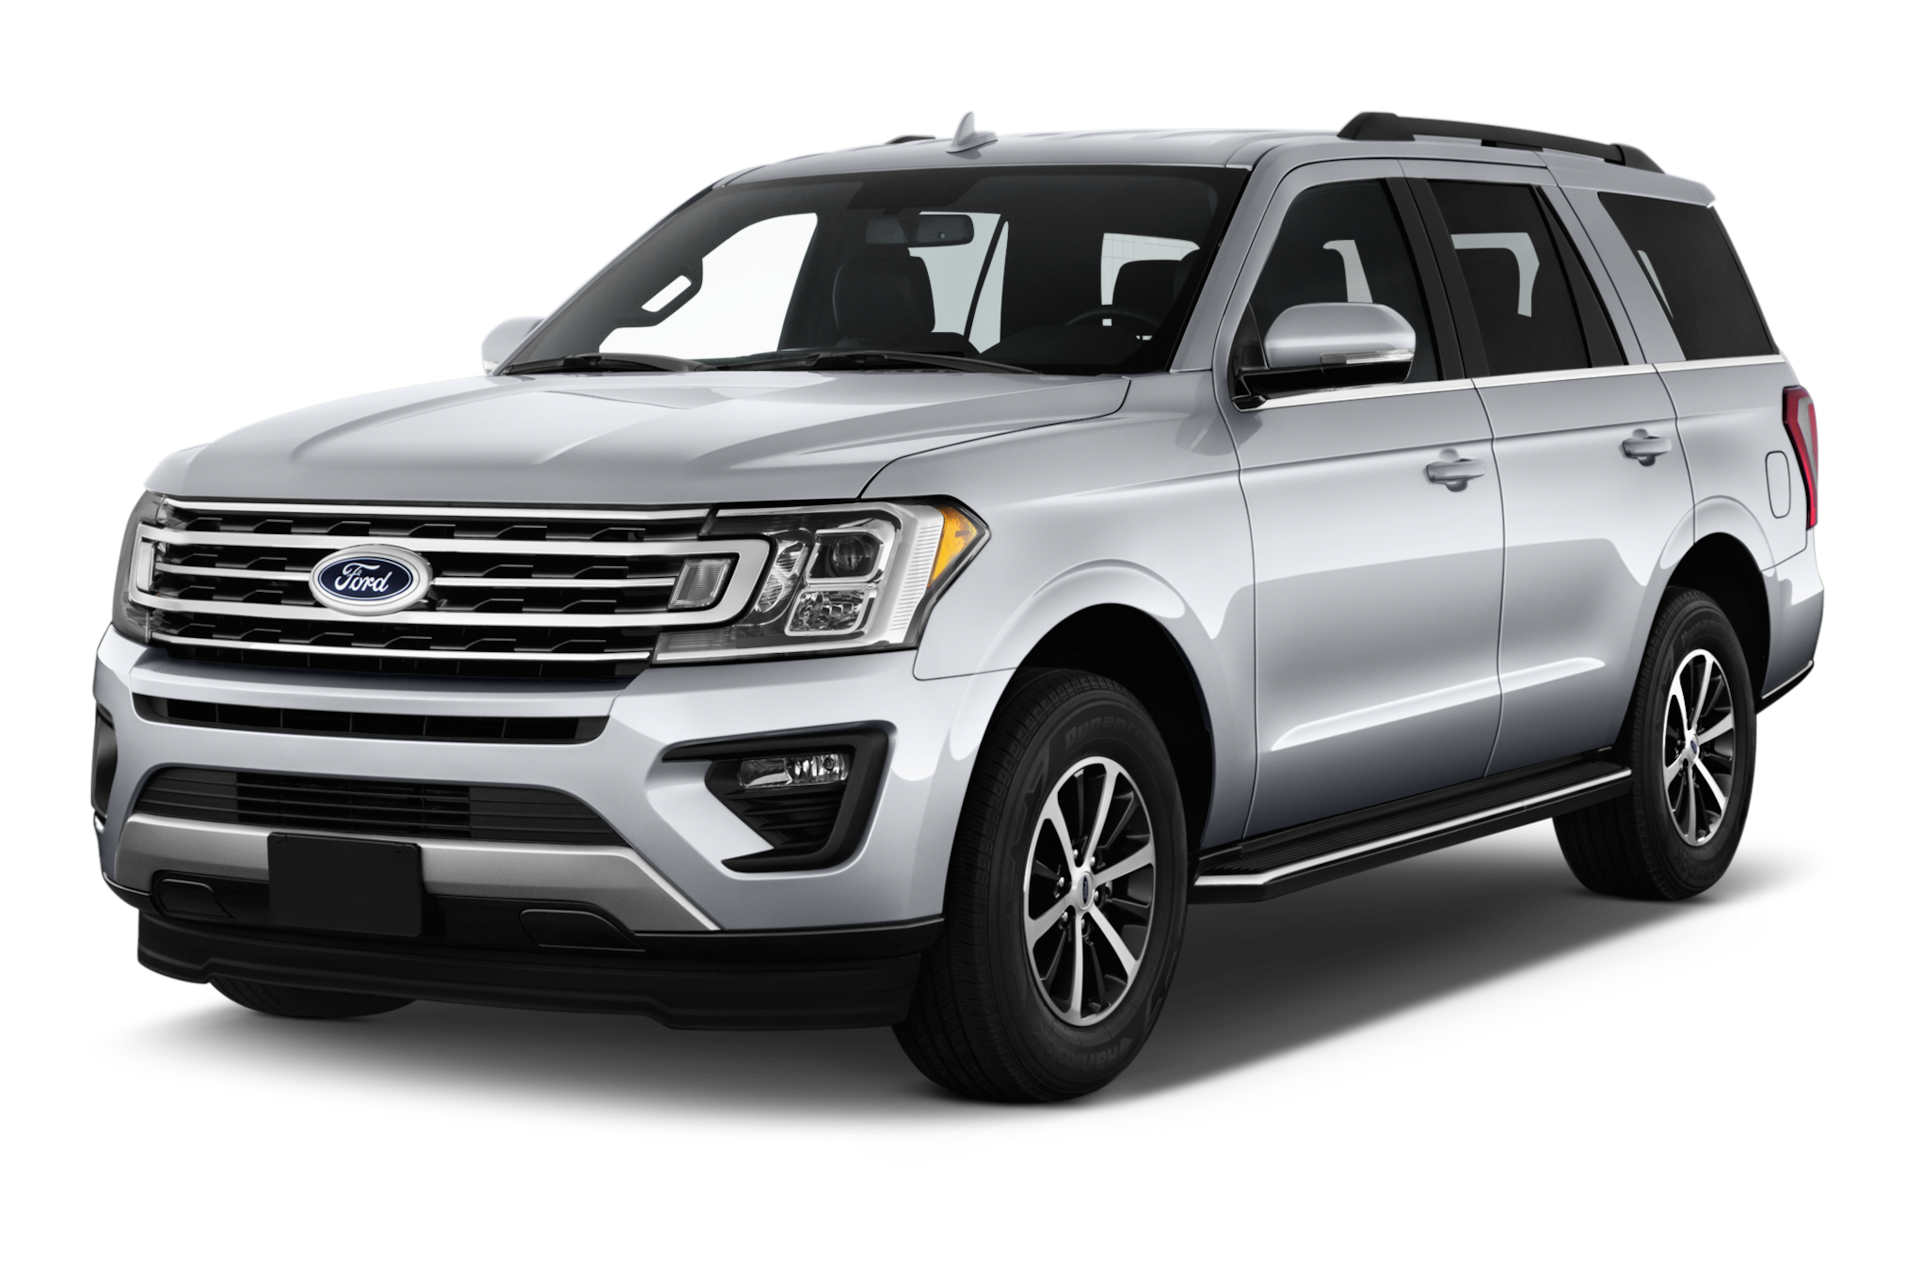 2021 Ford Expedition Prices, Reviews, and Photos - MotorTrend